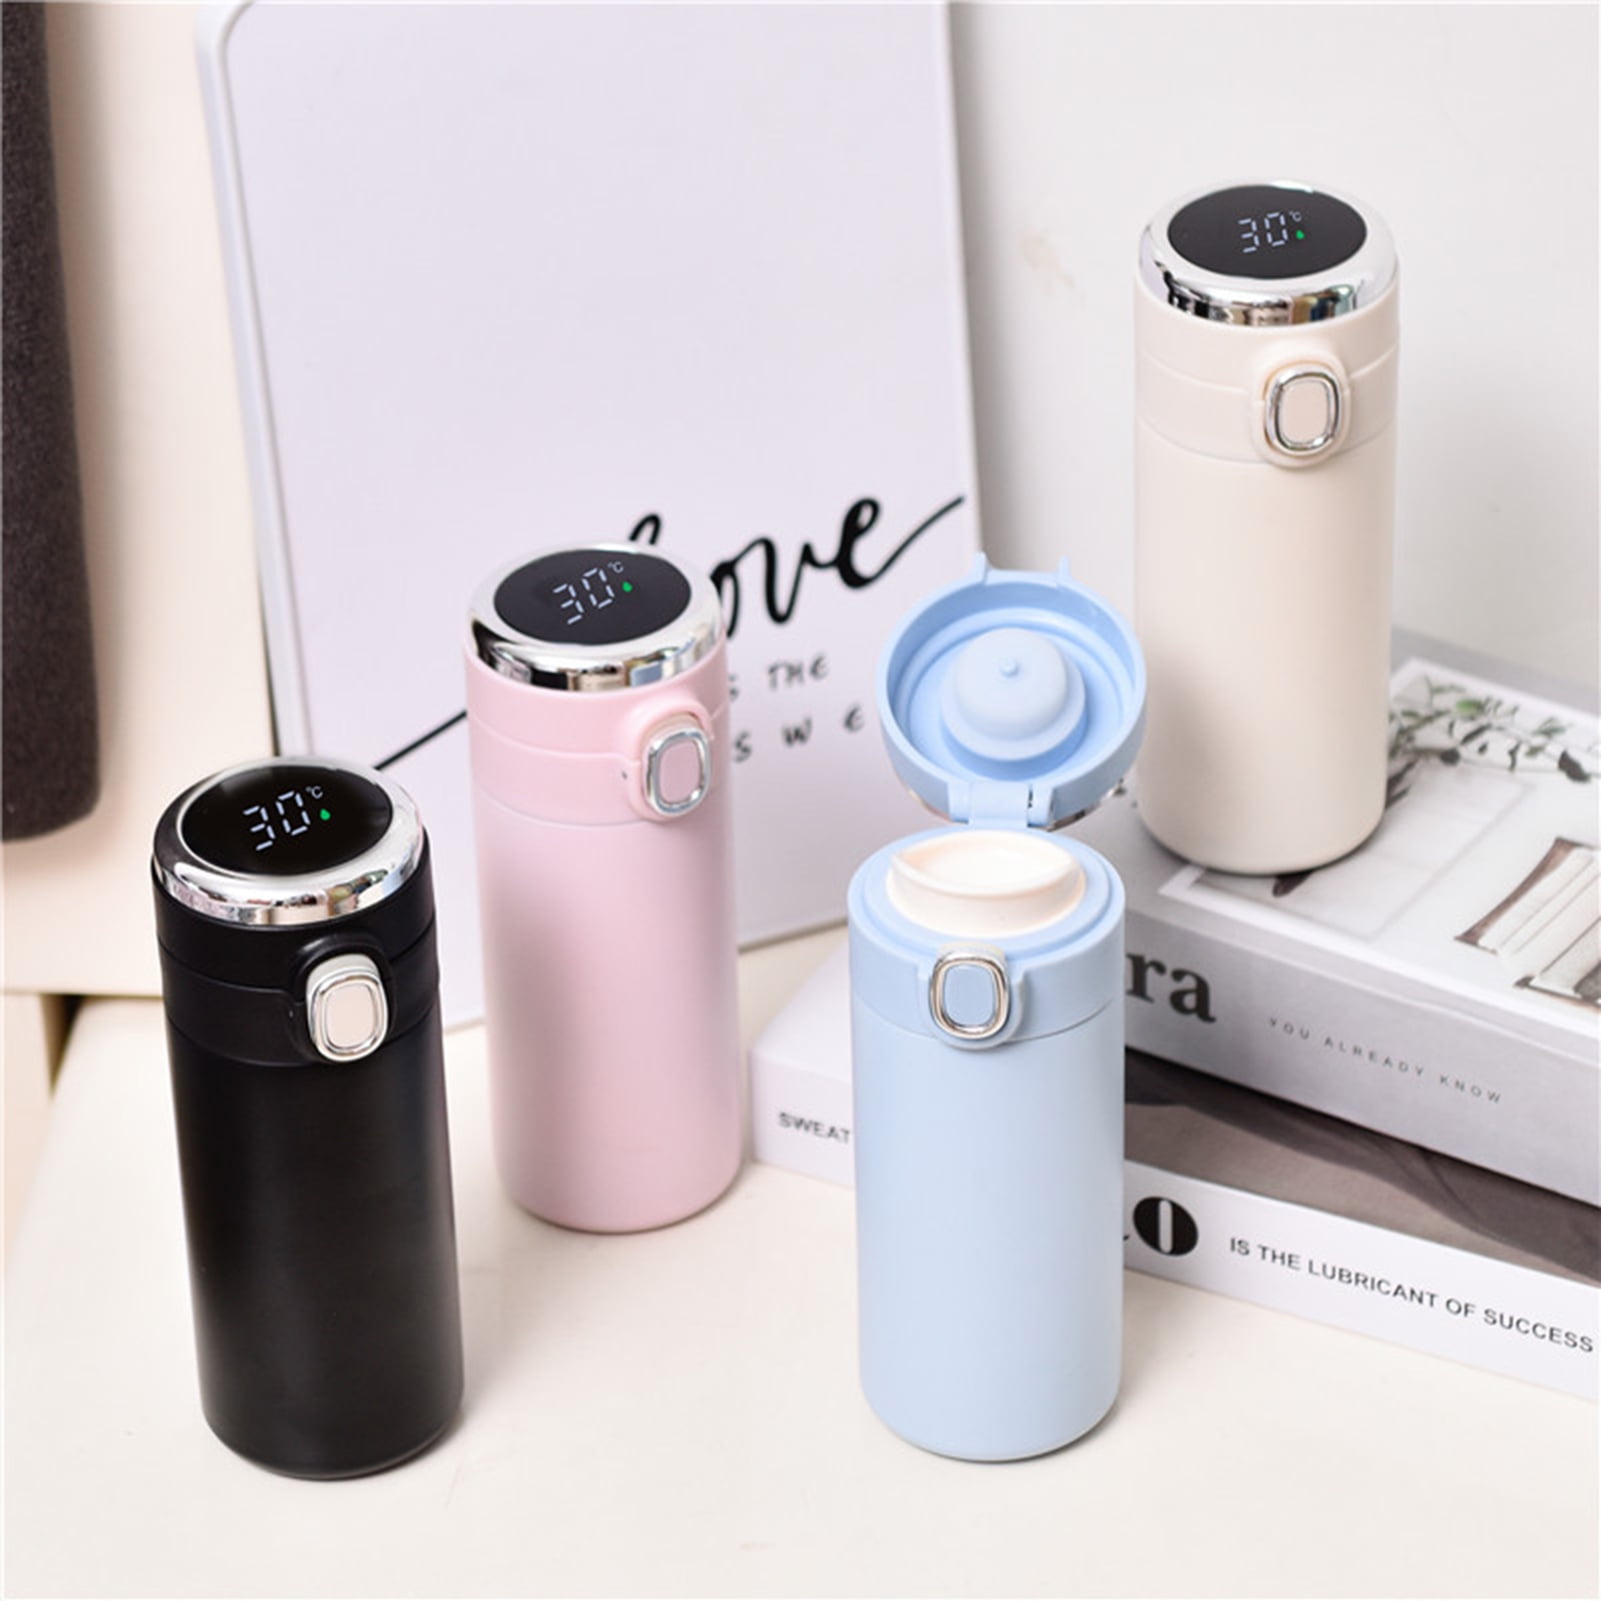 Stainless Steel Baby Orange Thermos Cup With Fashionable Letter Print  Perfect Gift For Kids, Students, And Vacuum Use H572 From Interhome, $3.7